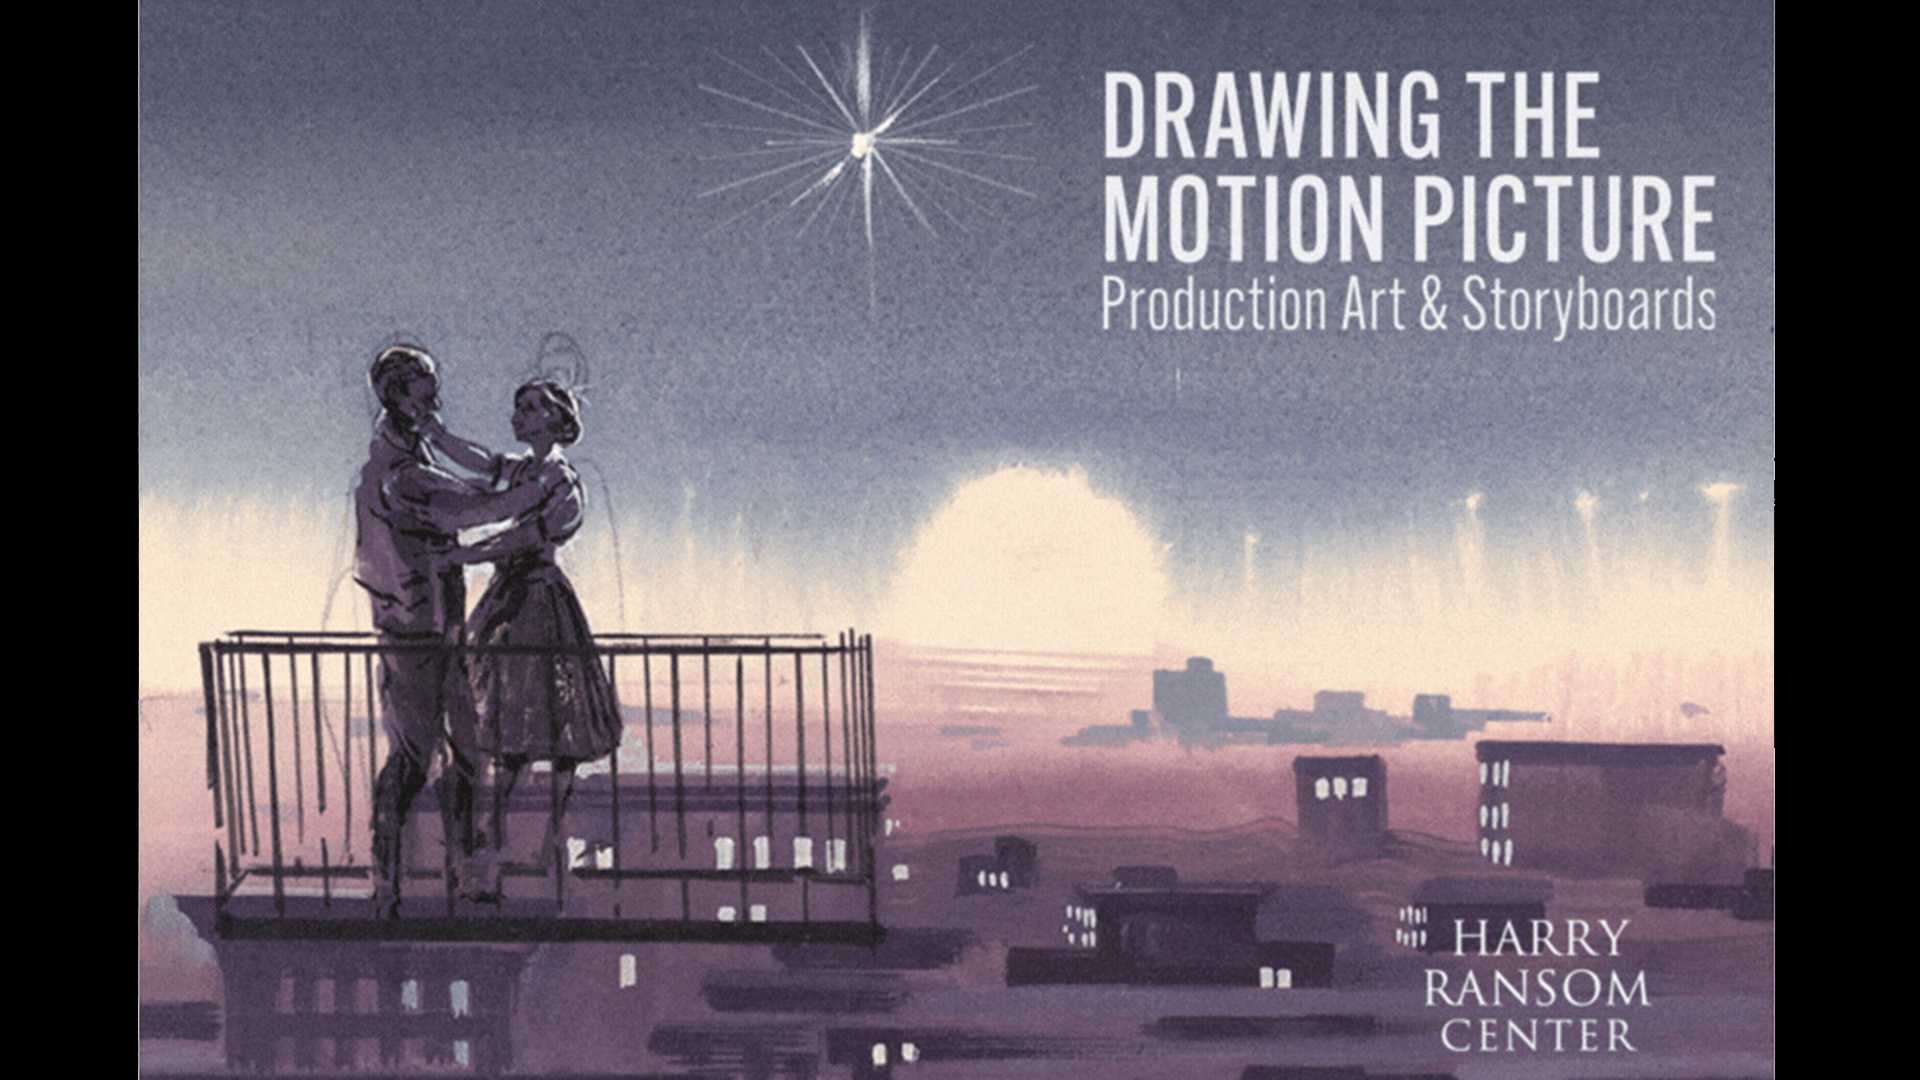 Drawing the Motion Picture tour